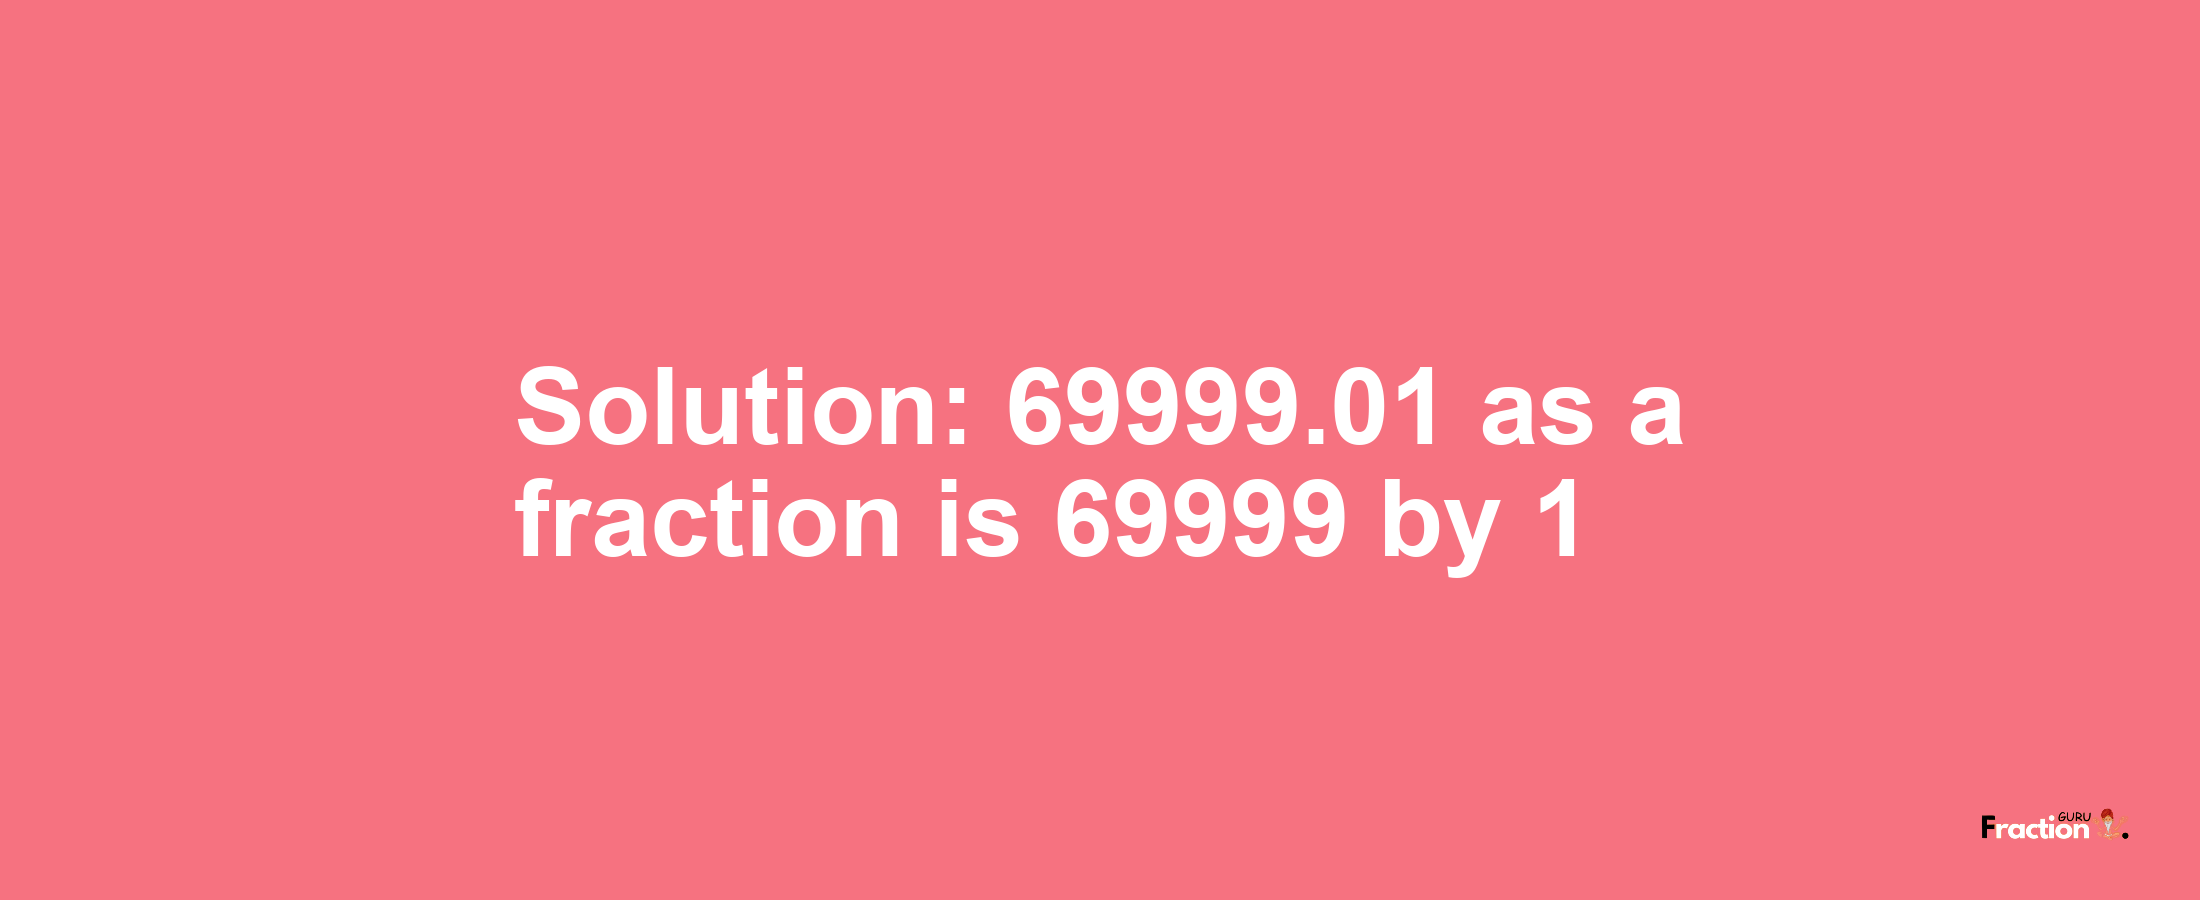 Solution:69999.01 as a fraction is 69999/1